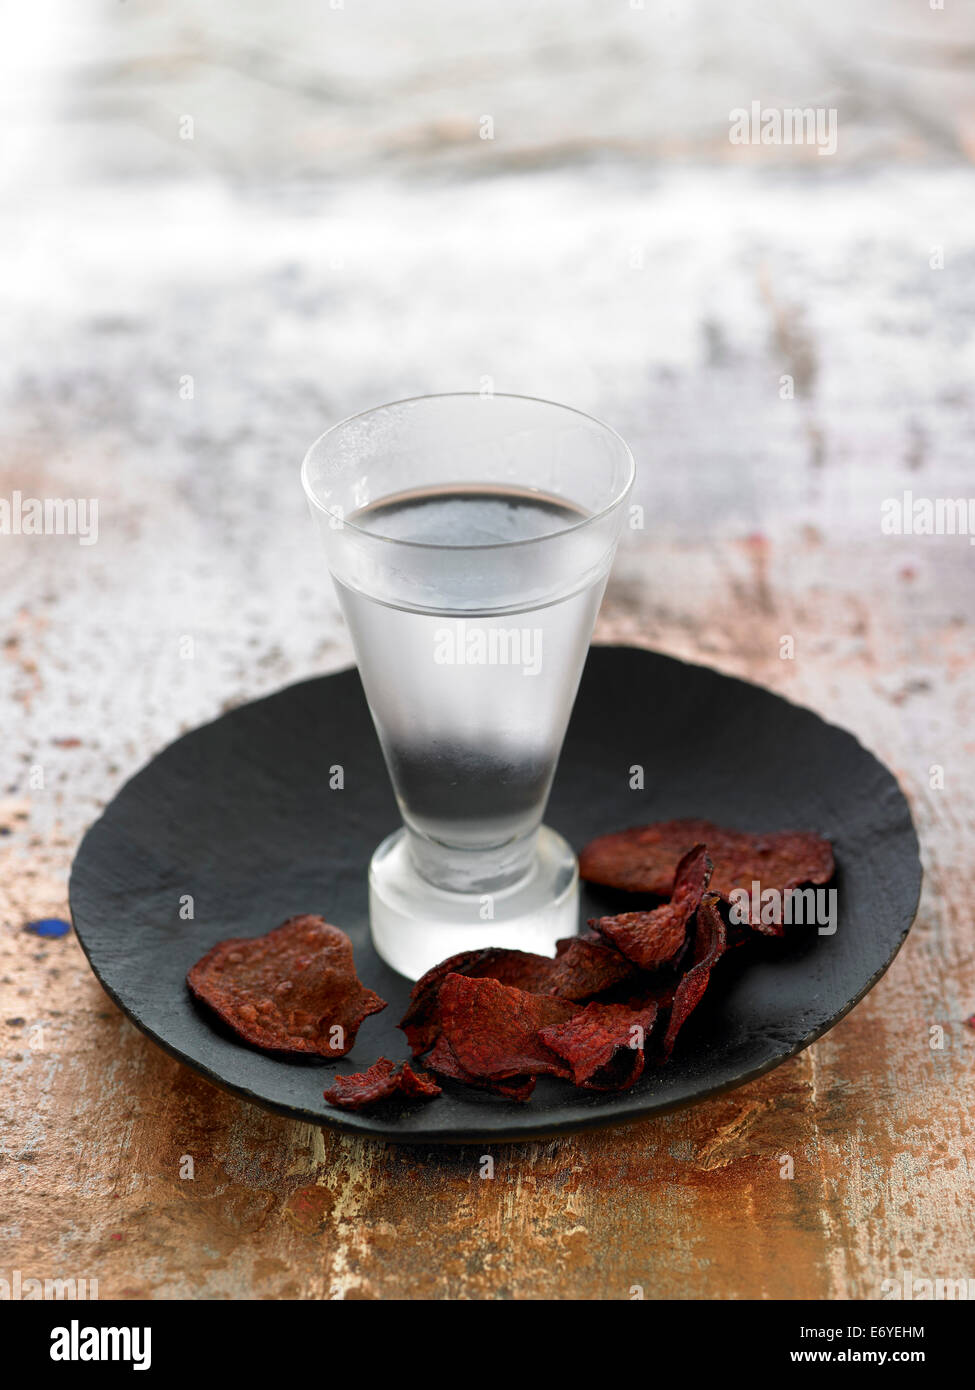 Glass of gin and beetroot crisps Stock Photo